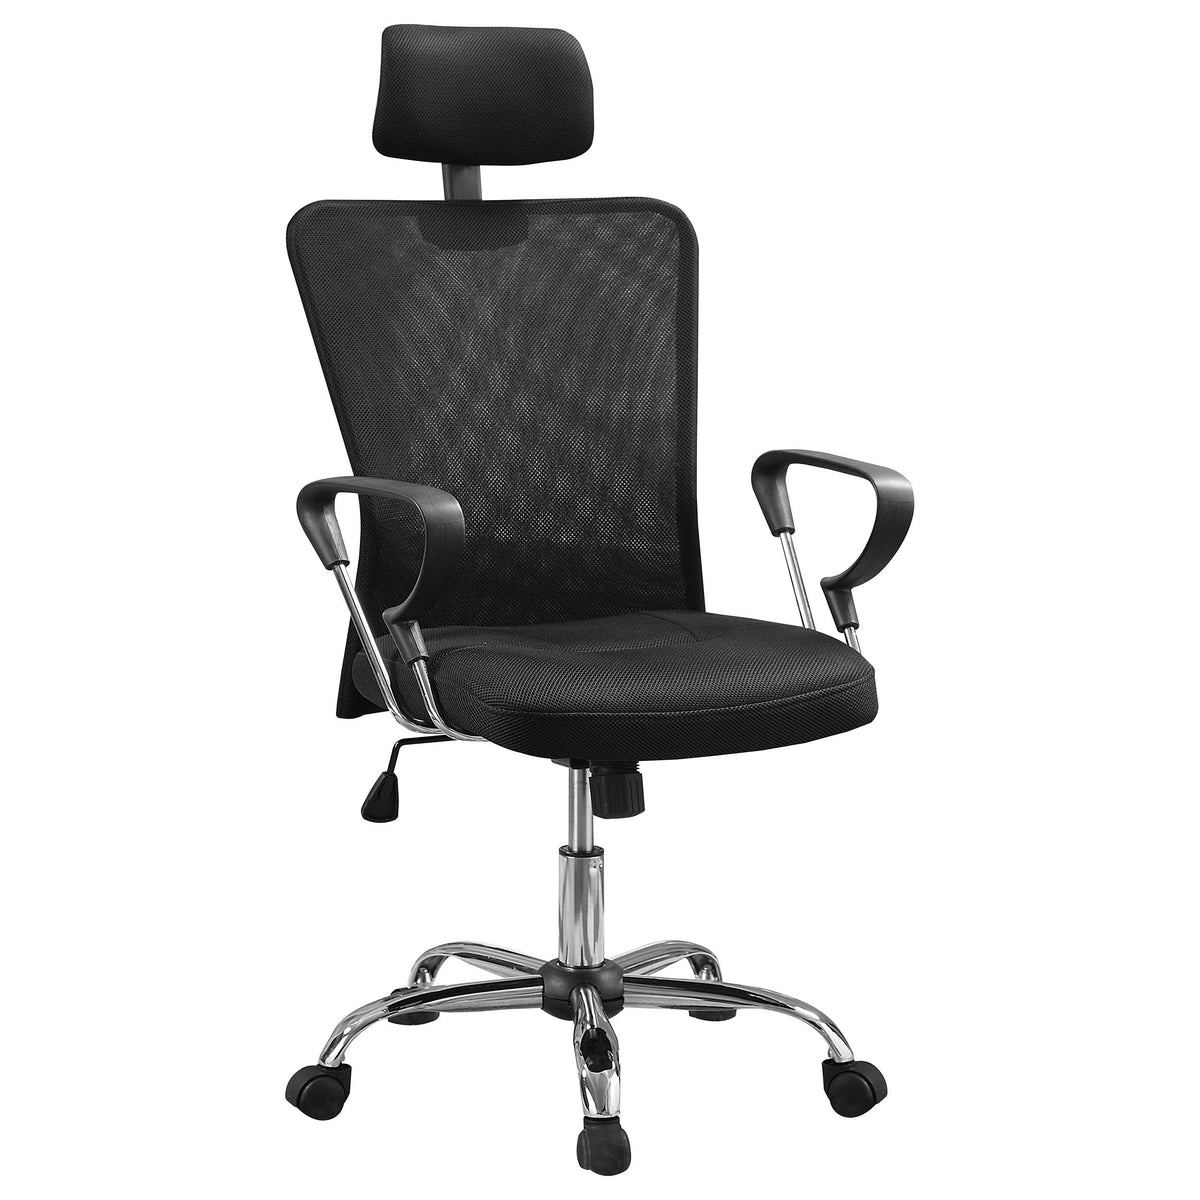 Stark Mesh Back Office Chair Black and Chrome Stark Mesh Back Office Chair Black and Chrome Half Price Furniture